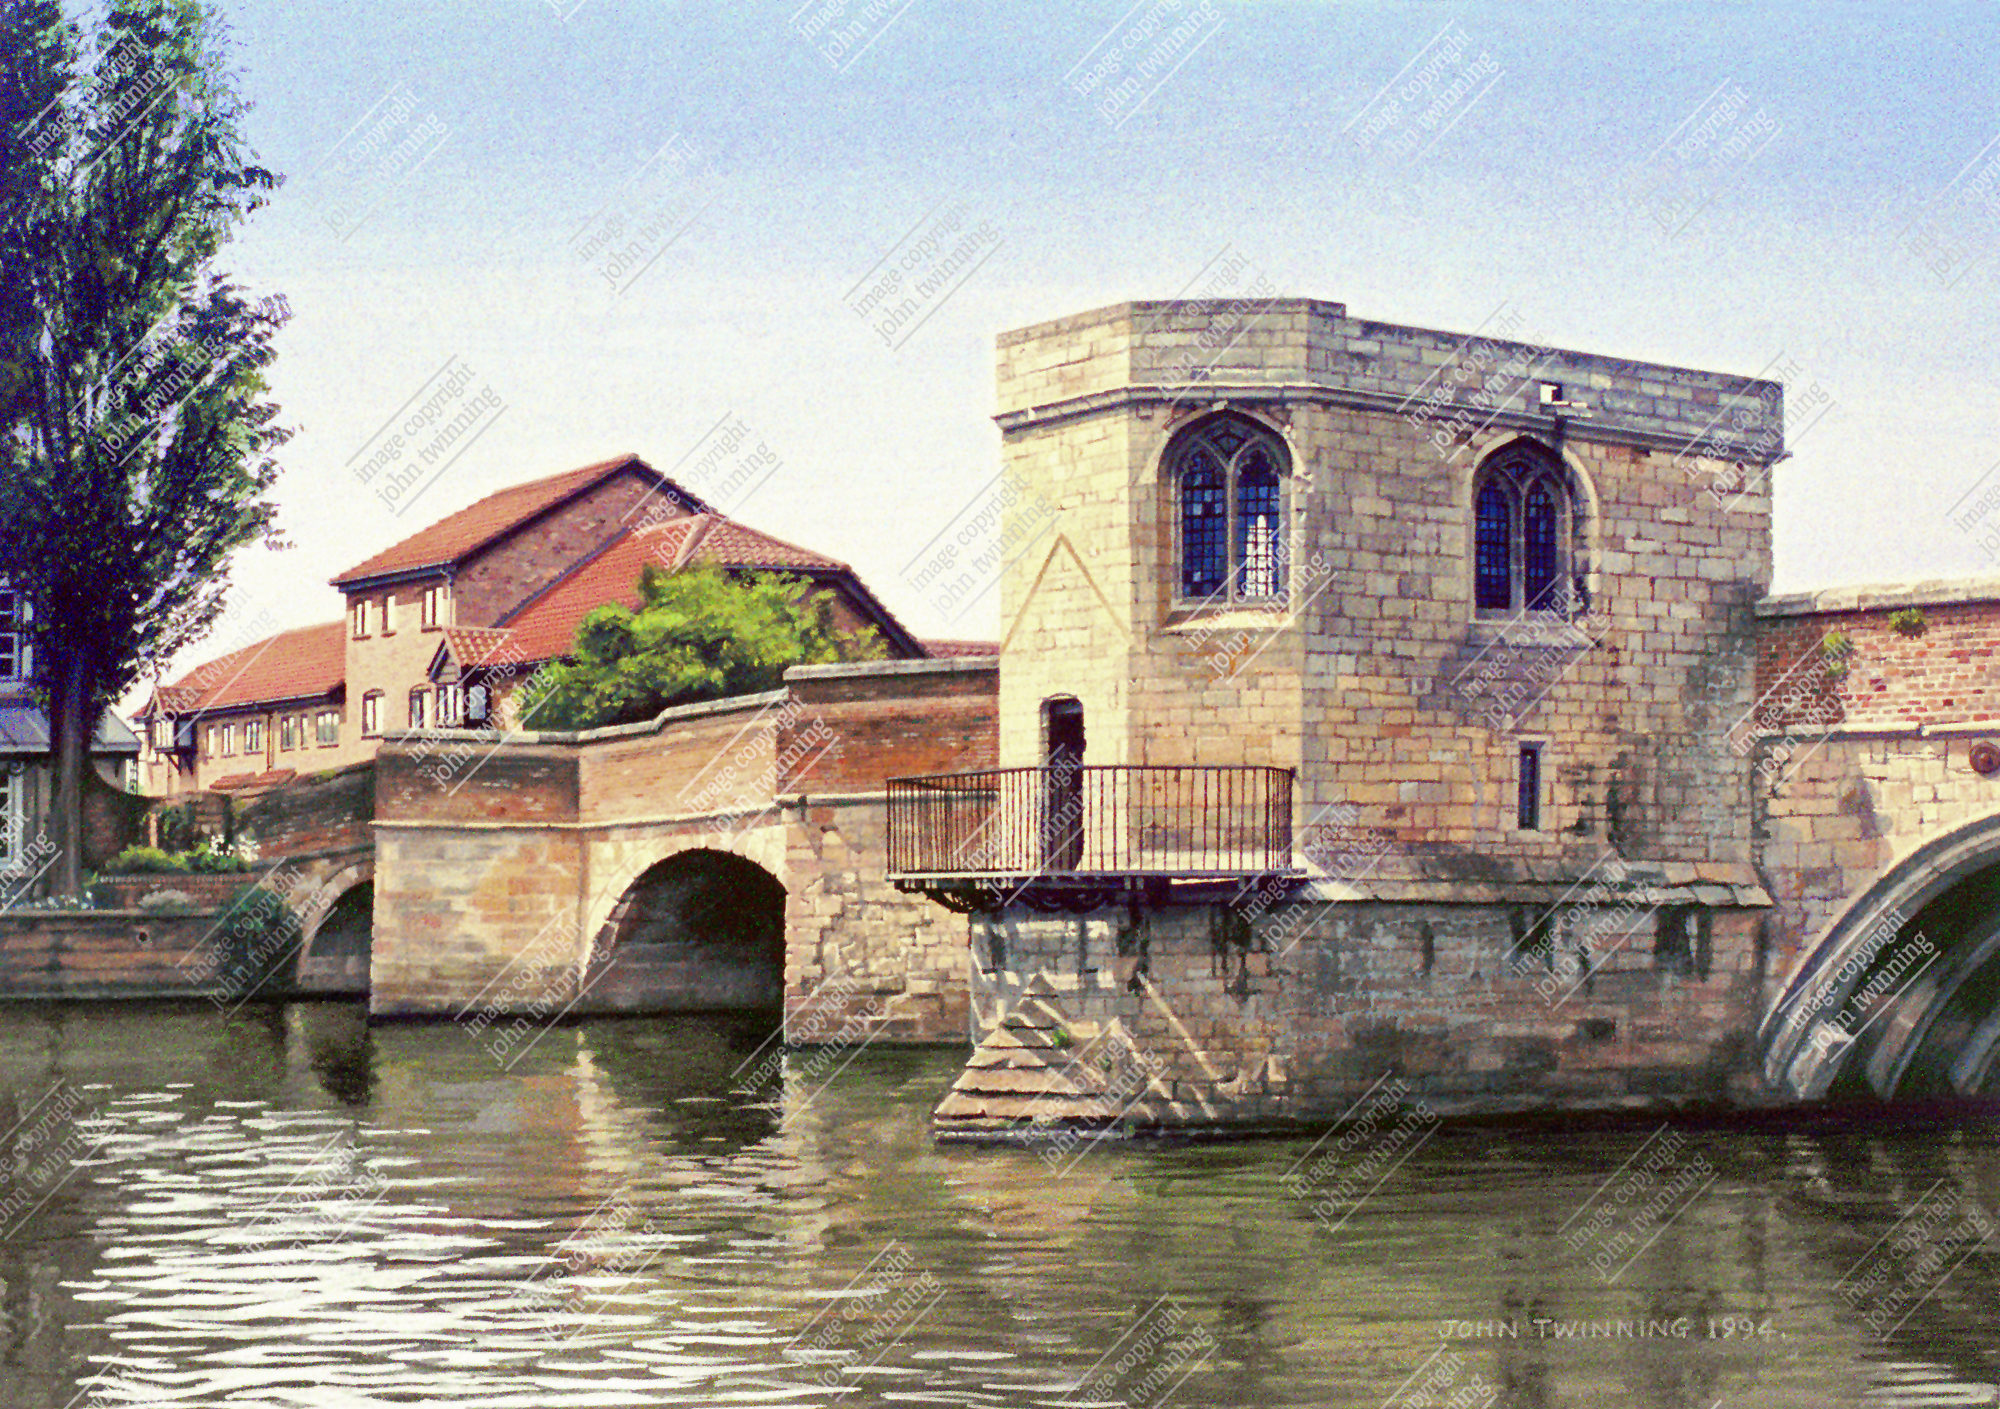 'St. Ives Bridge And Chapel' – art print from a painting of this cambridgeshire market town’s historic bridge